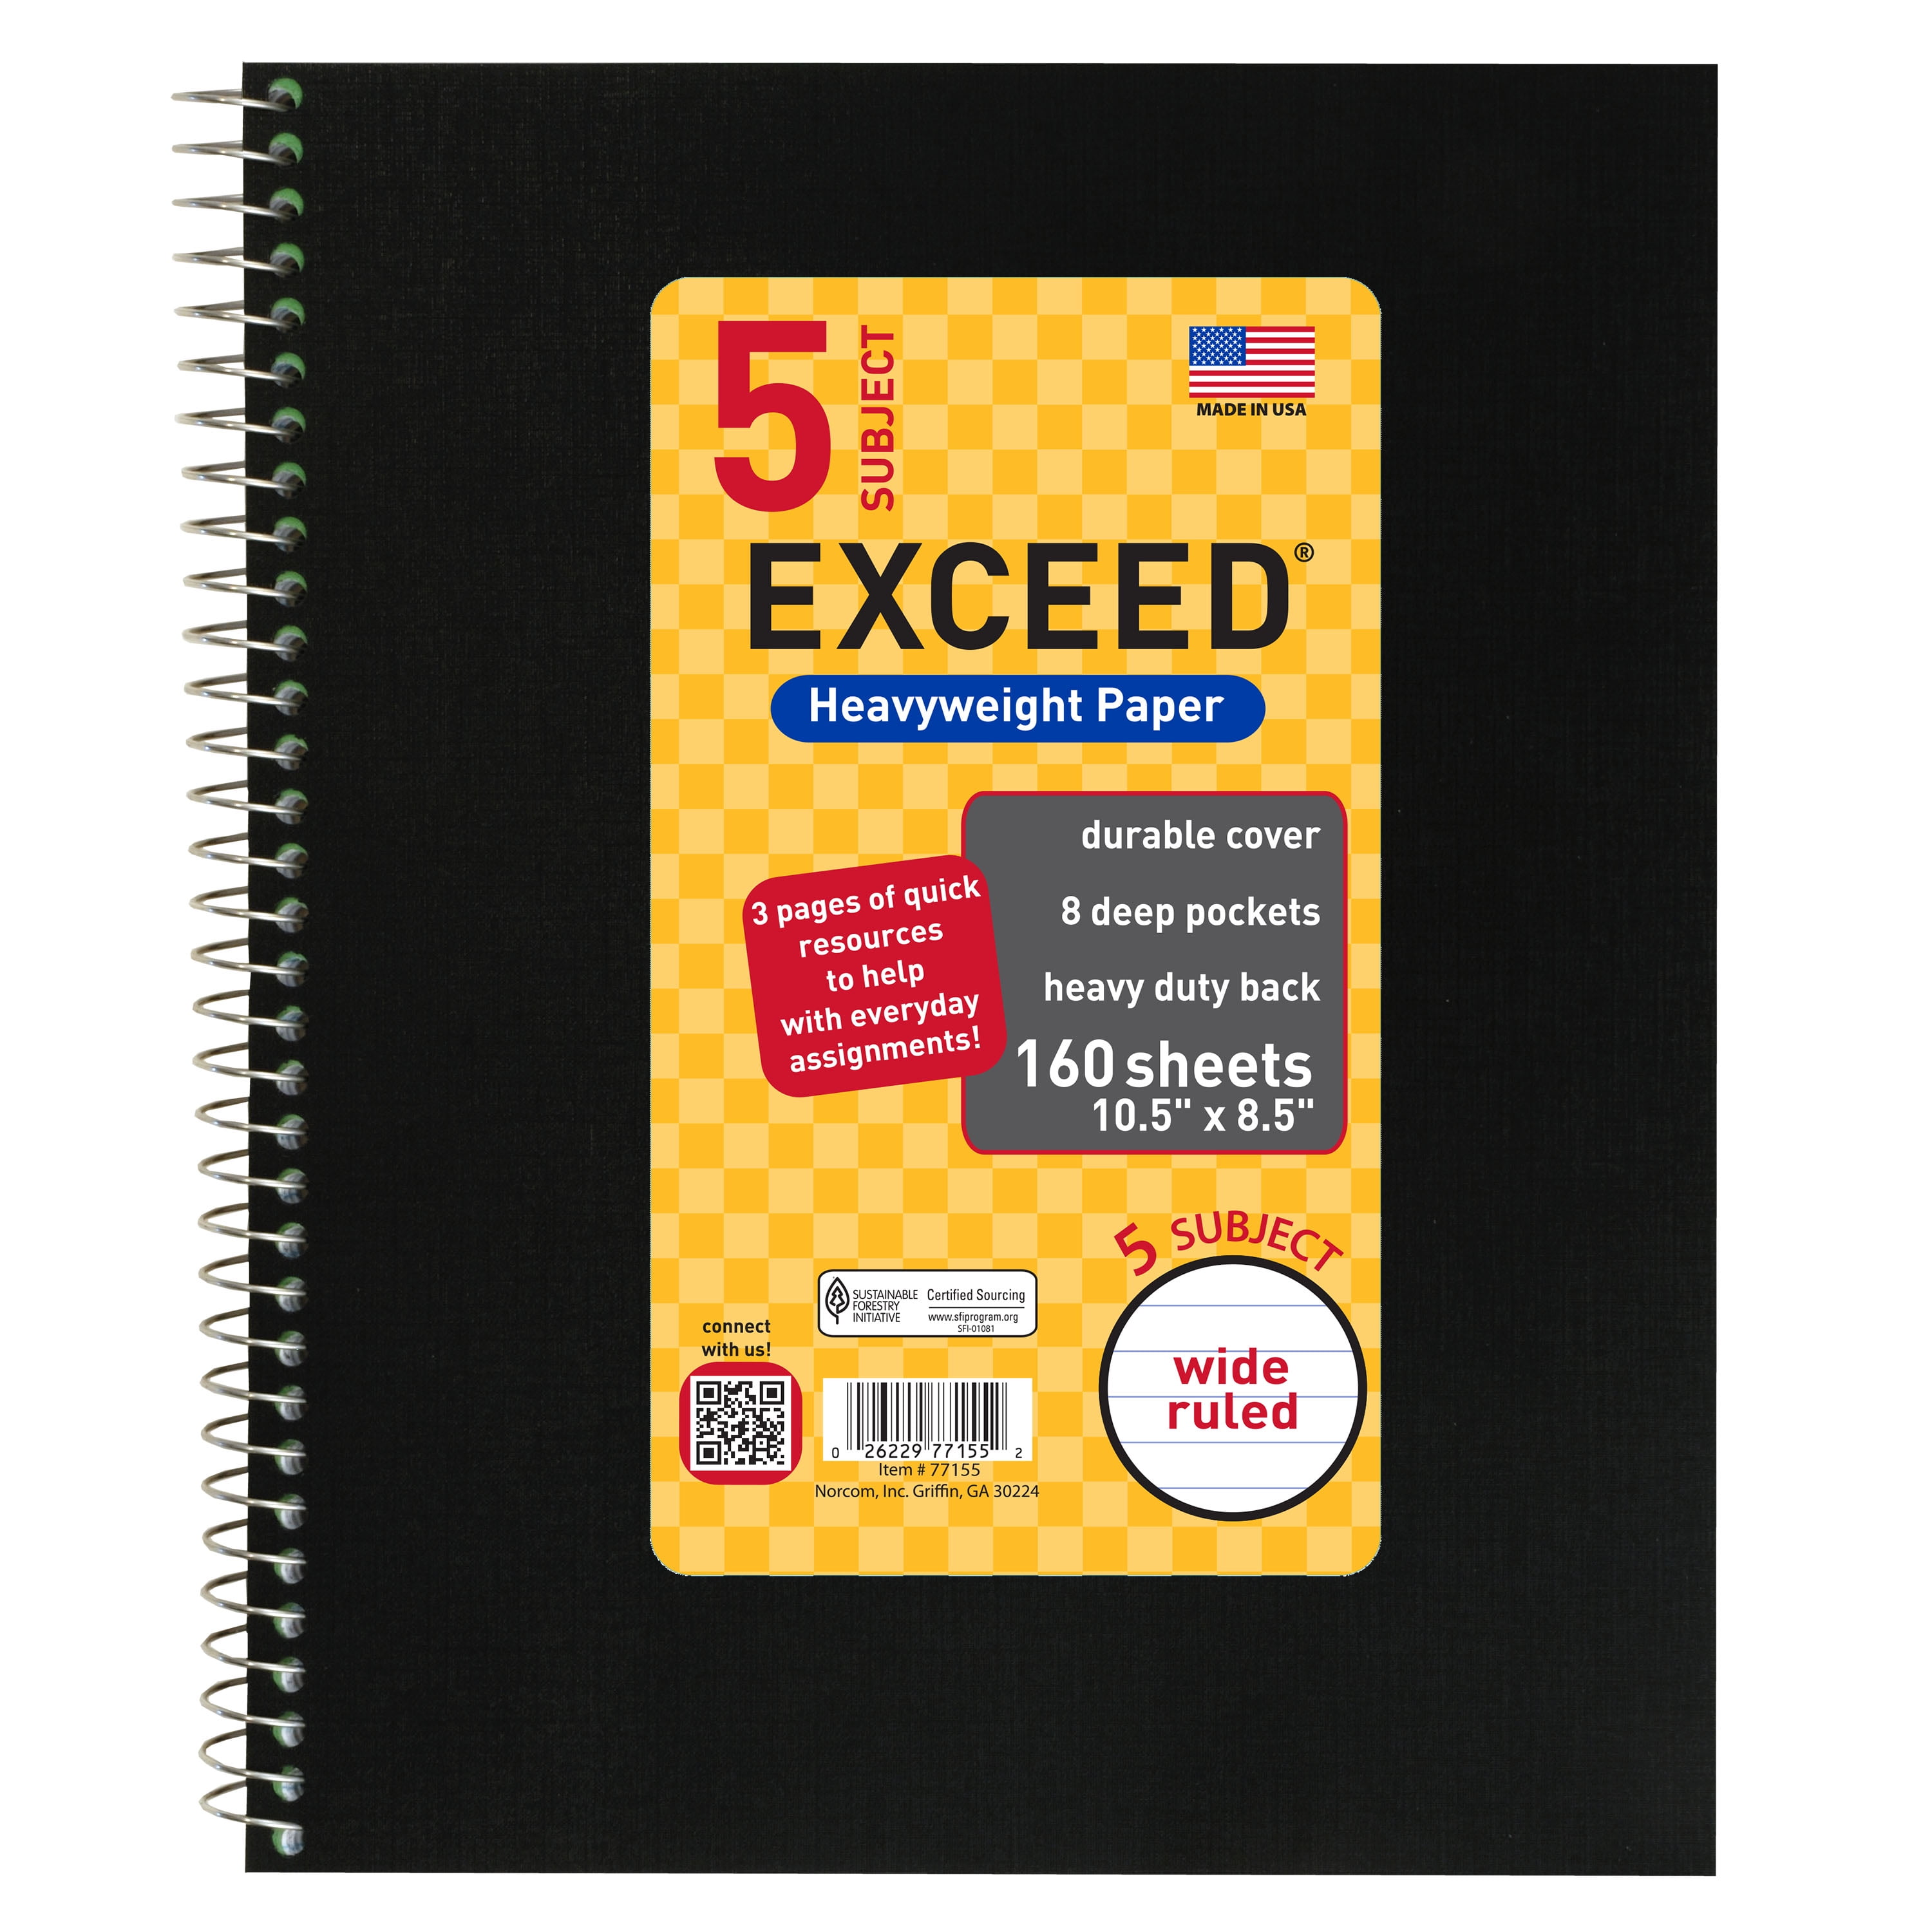 Details about   NORCOM EXCEED 5 SUBJECT Heavyweight Paper 160 Sheets Wide Ruled Notebook New 